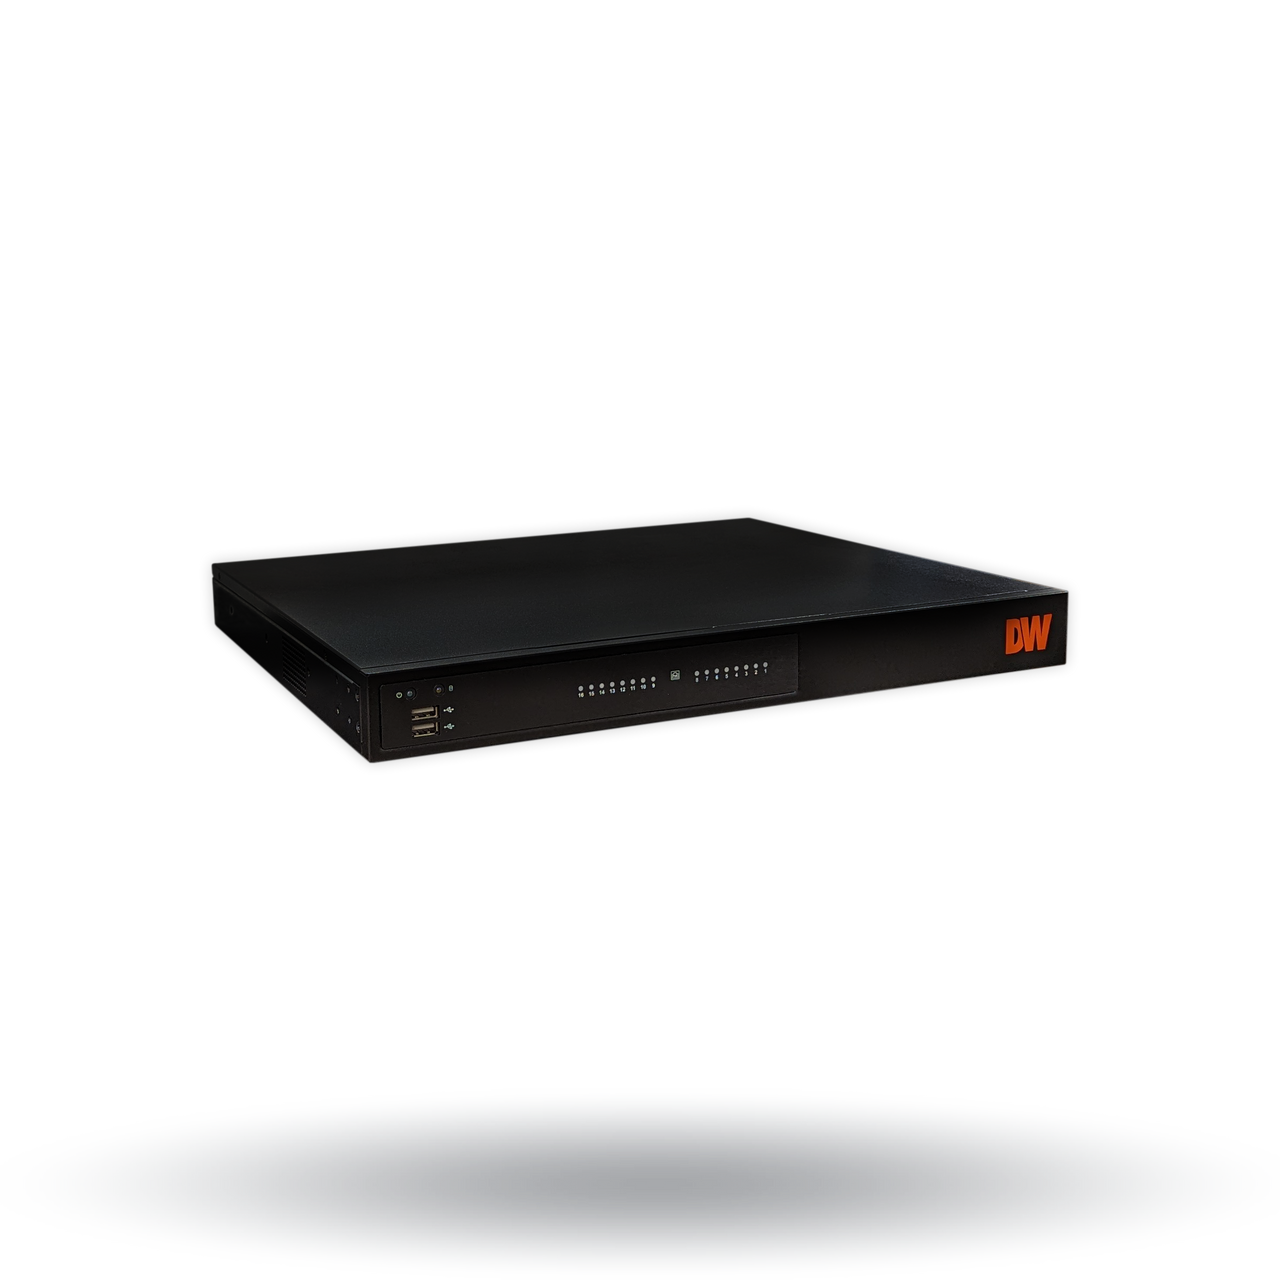 Digital Watchdog DW-BJCX32T-LX 24-Channel 80Mbps NVR with 16 PoE Ports, 32TB HDD